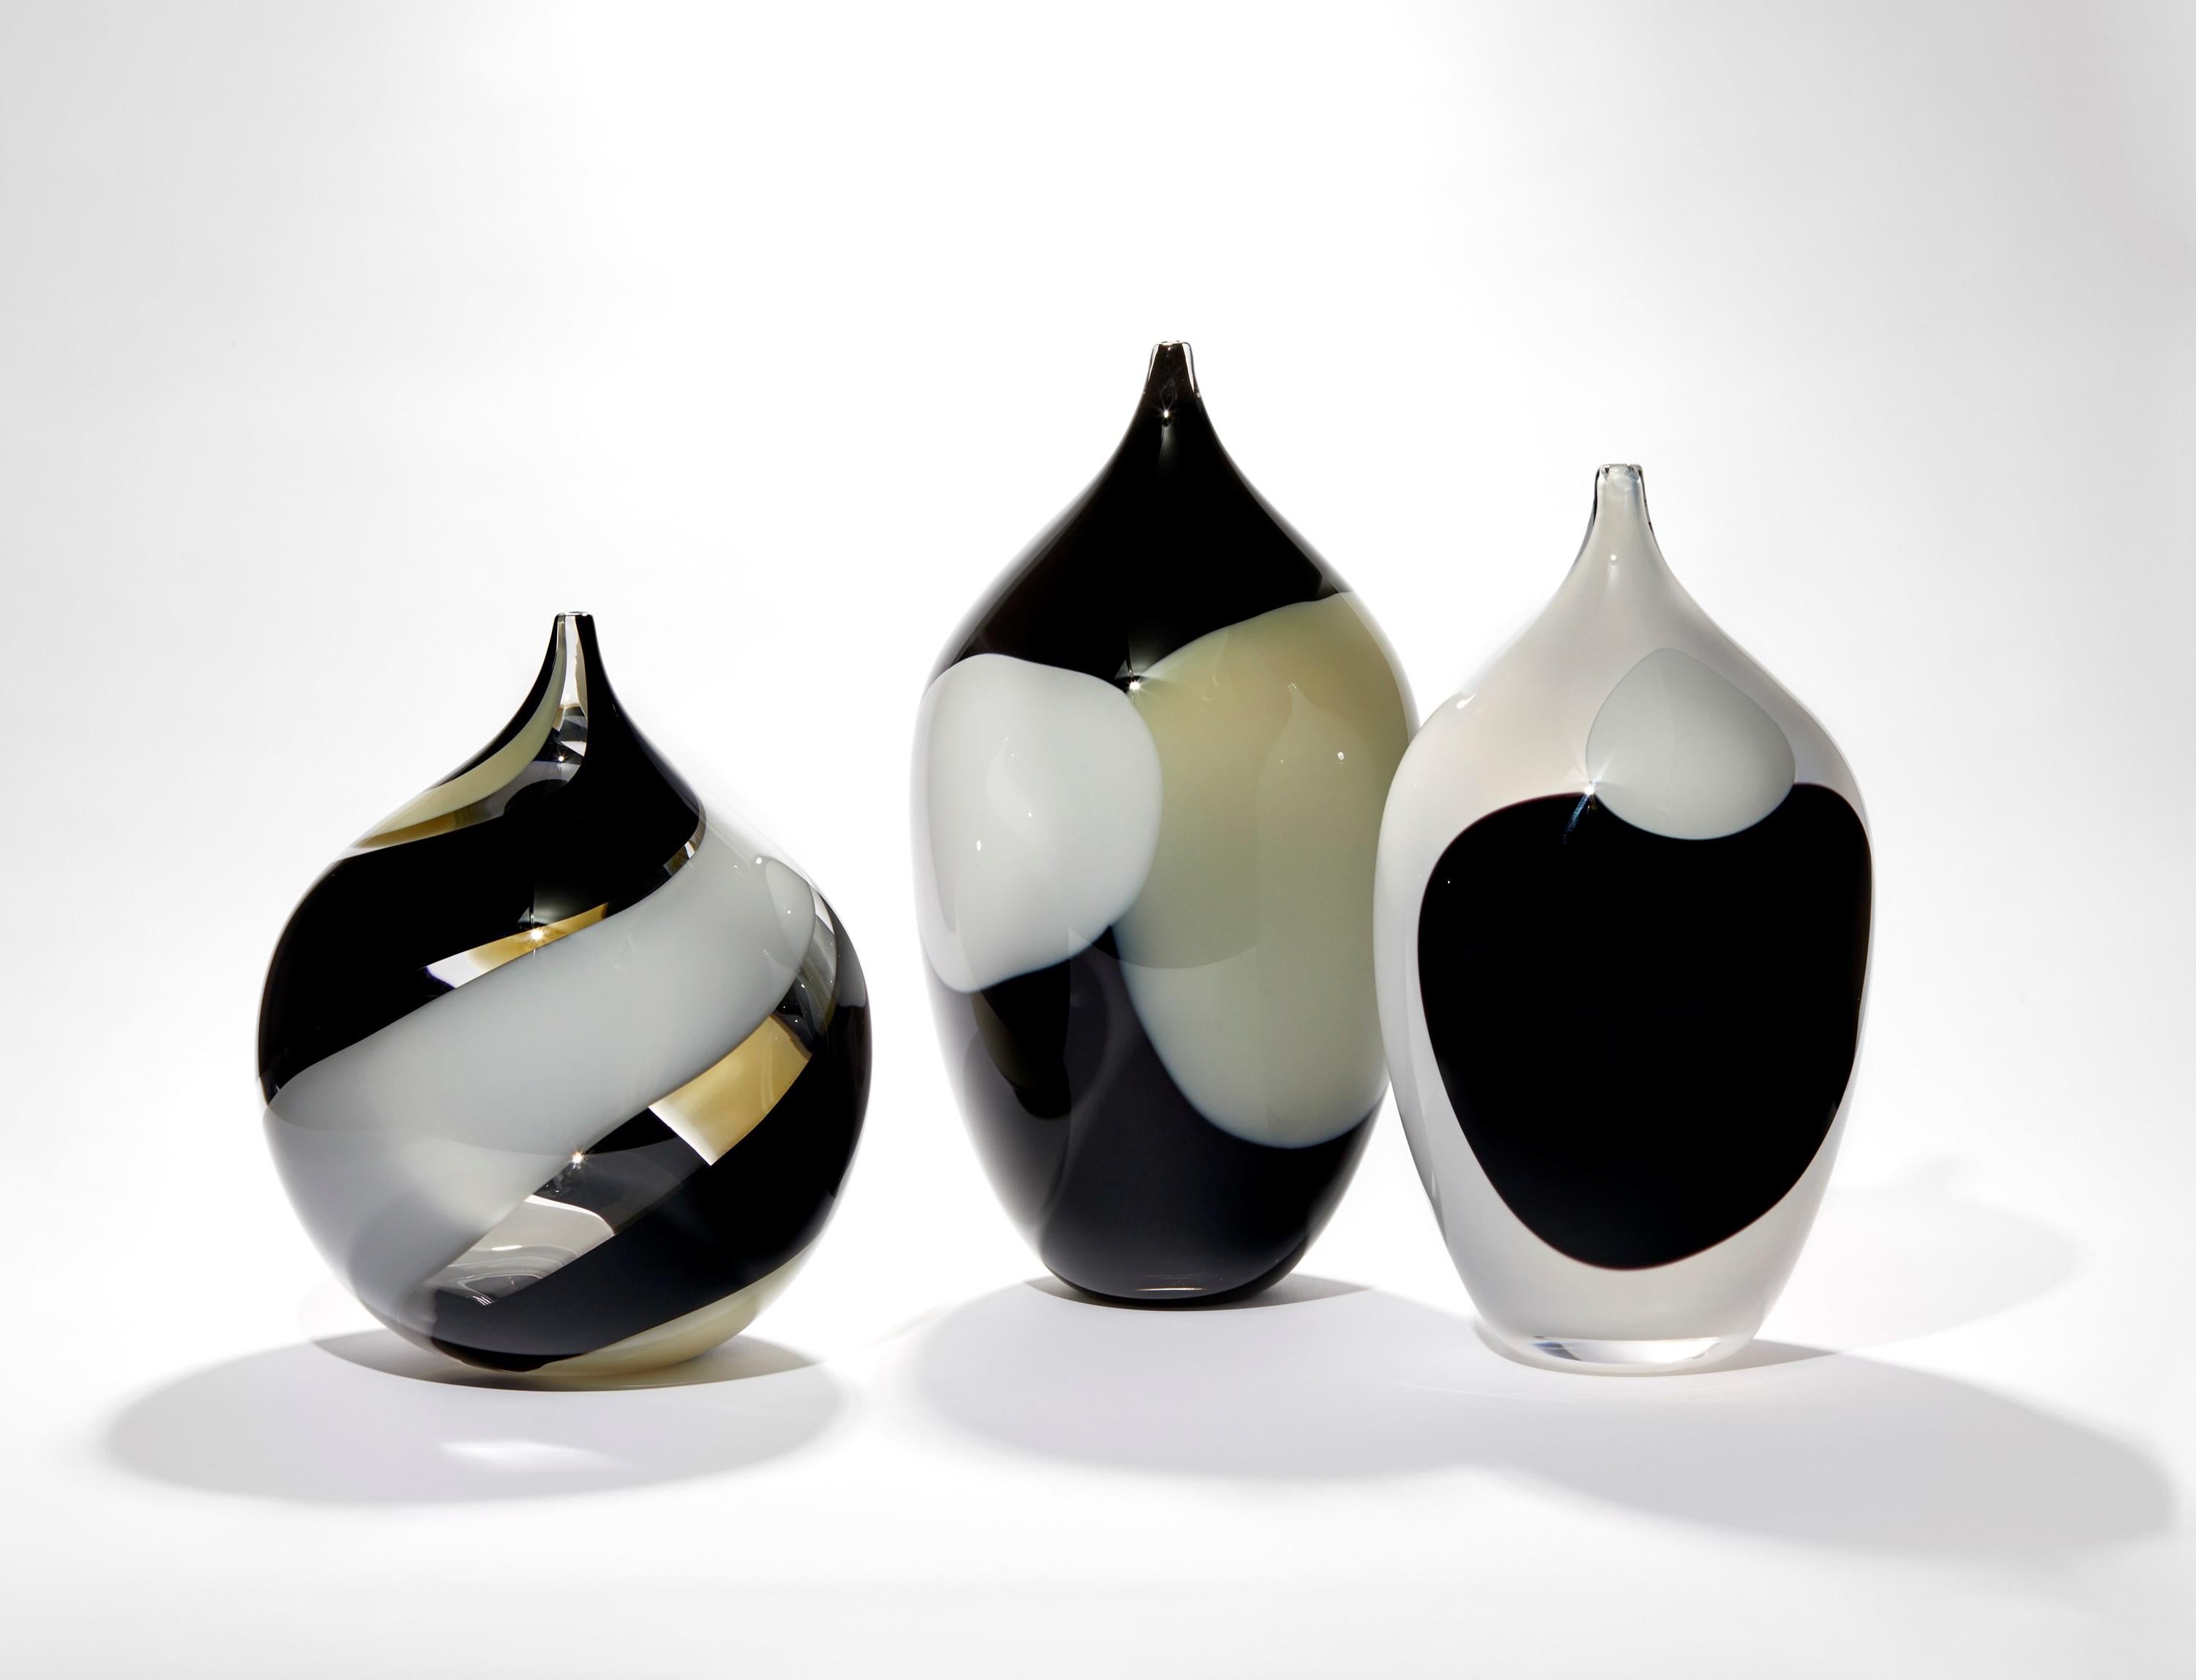 Organic Modern Nocturne, Black, Cream & White Abstract Decorative Glass Vessel by Gunnel Sahlin For Sale